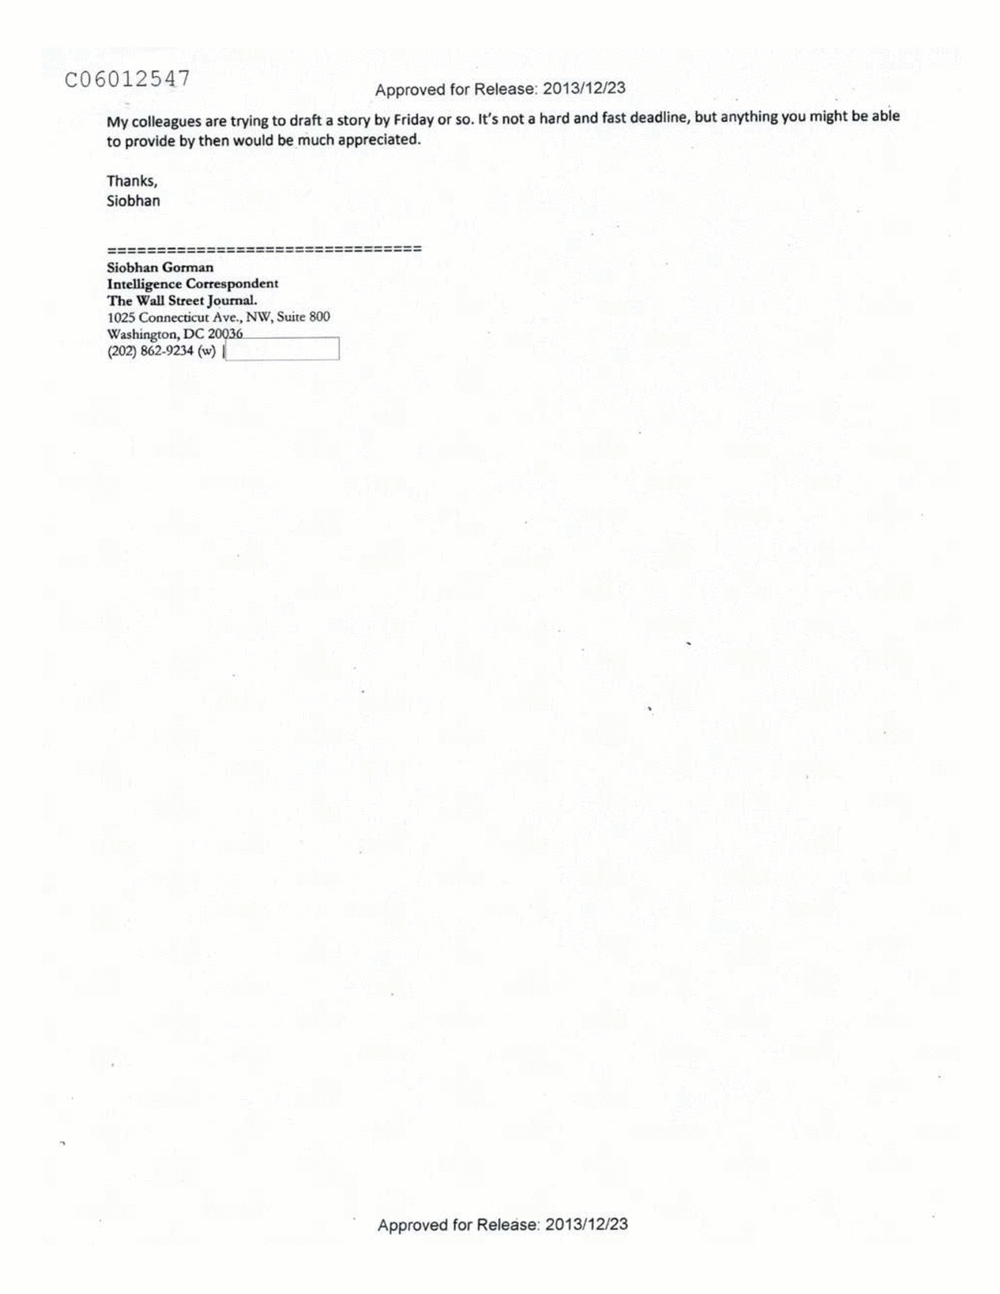 Page 83 from Email Correspondence Between Reporters and CIA Flacks